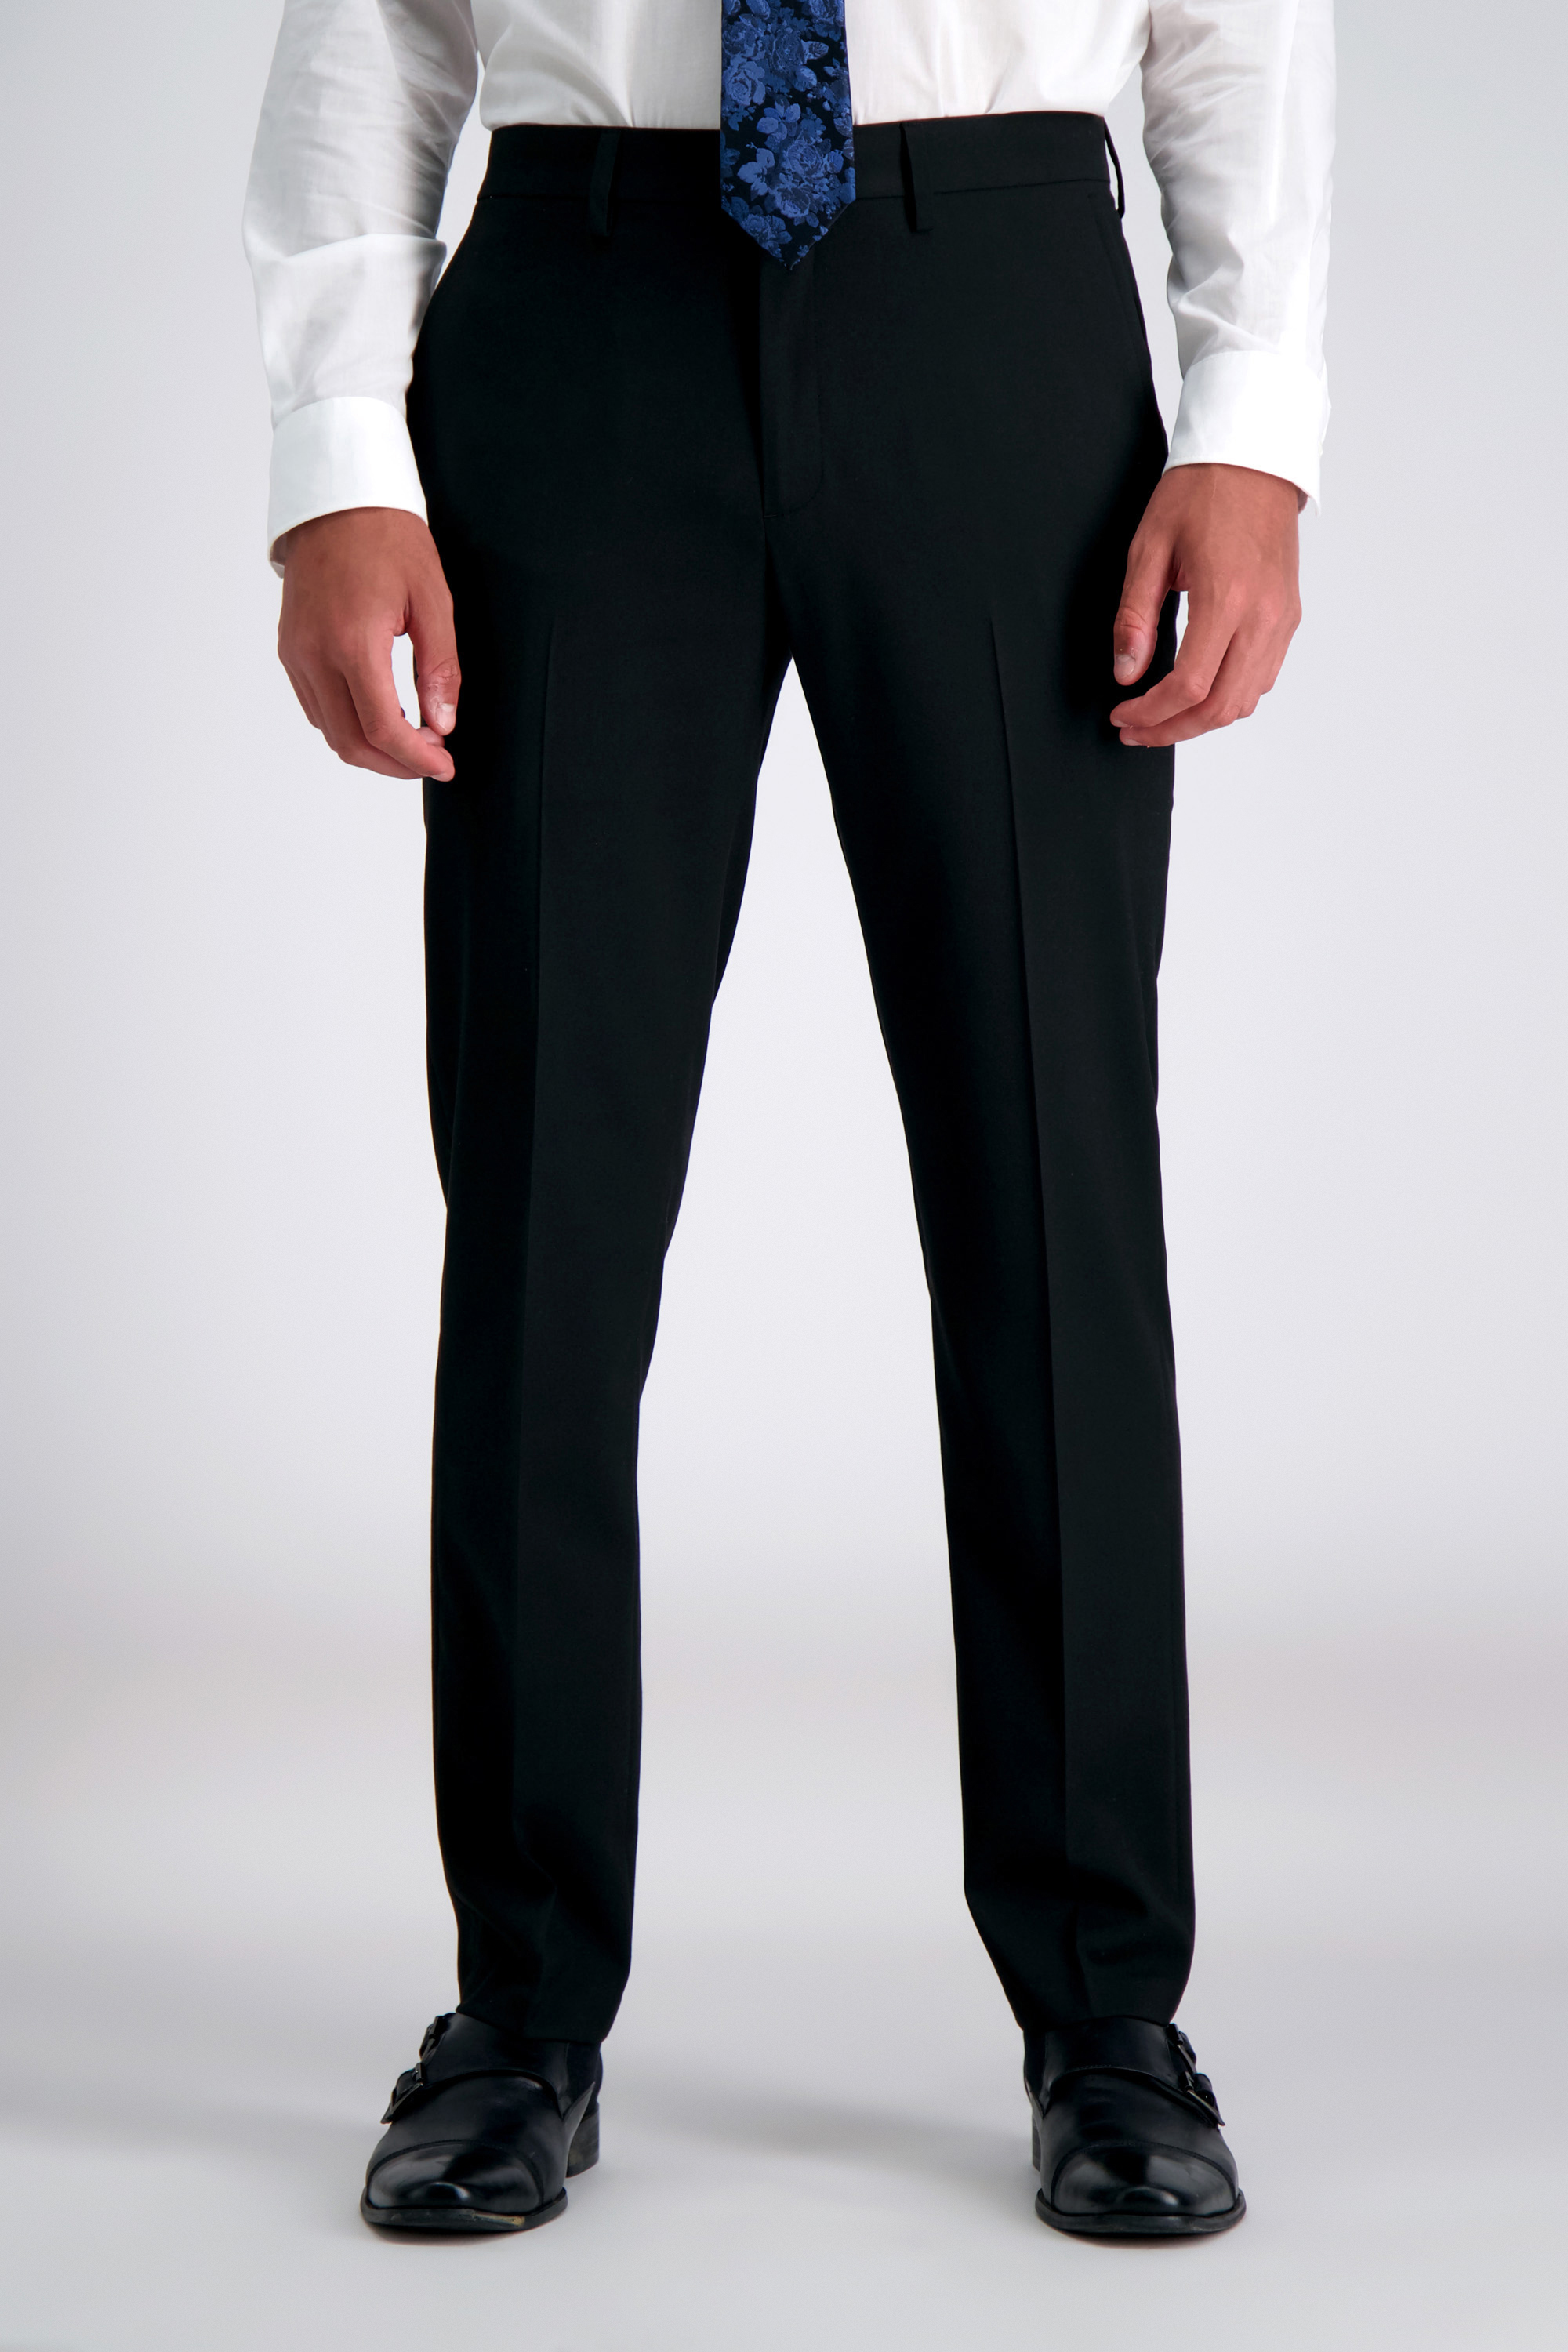 NEW J M Haggar Men's Navy Blue Luxury Comfort Chino Classic Fit Flat Front Pant 